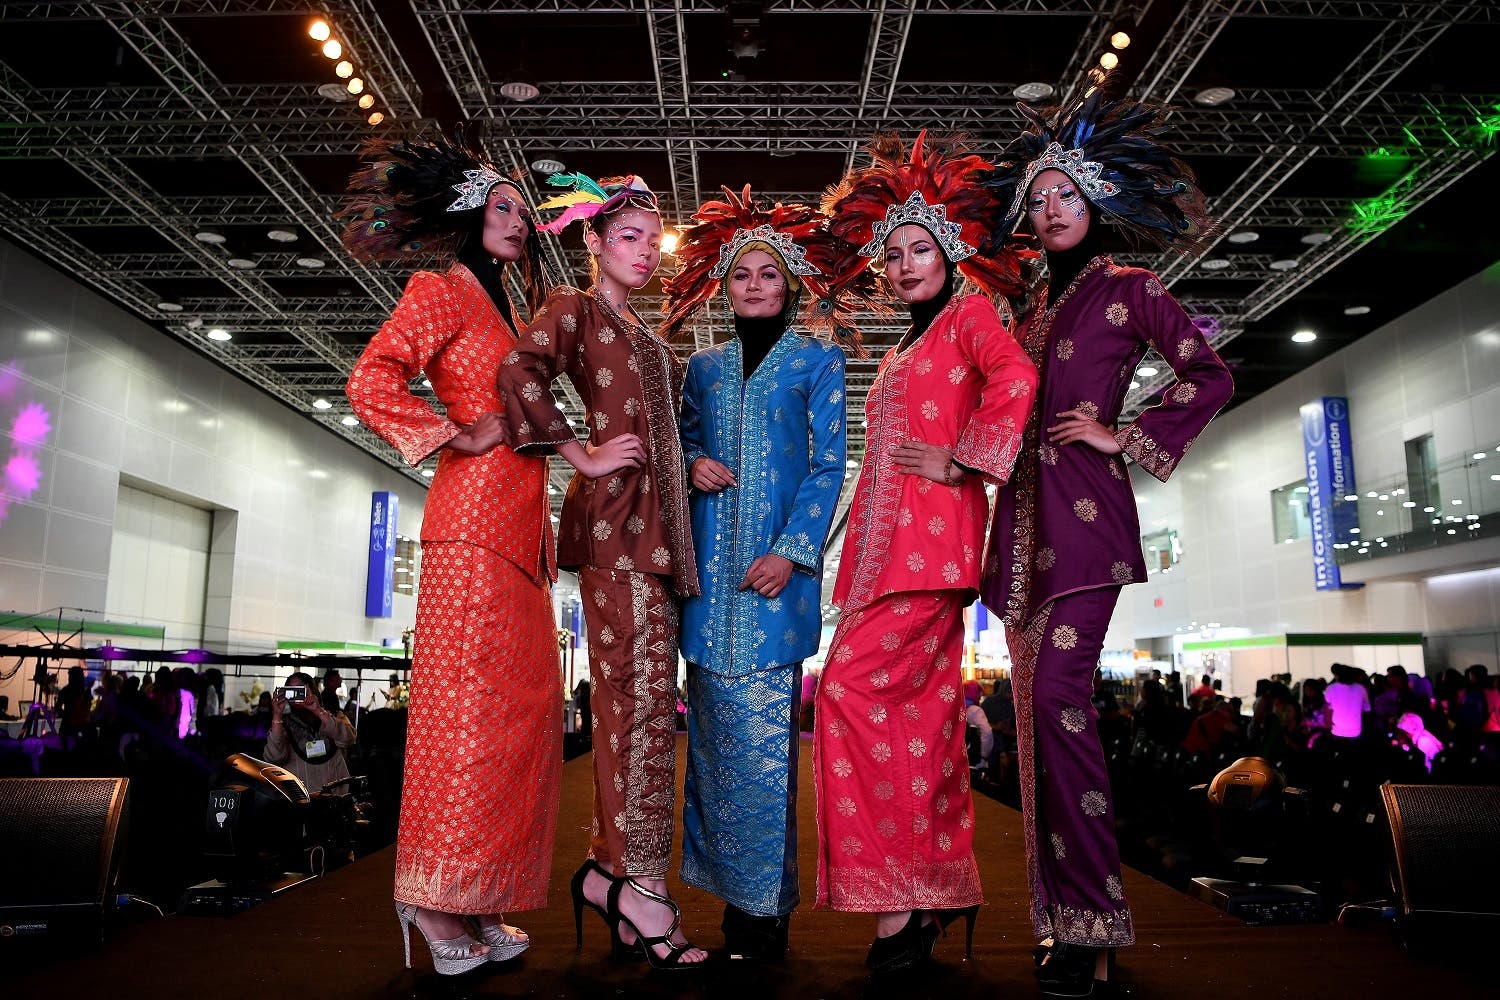 The show, which is part of an international beauty exhibition being held in Kuala Lumpur, showcases creative interpretations of traditional Malay costumes and make-up techniques. (AFP)